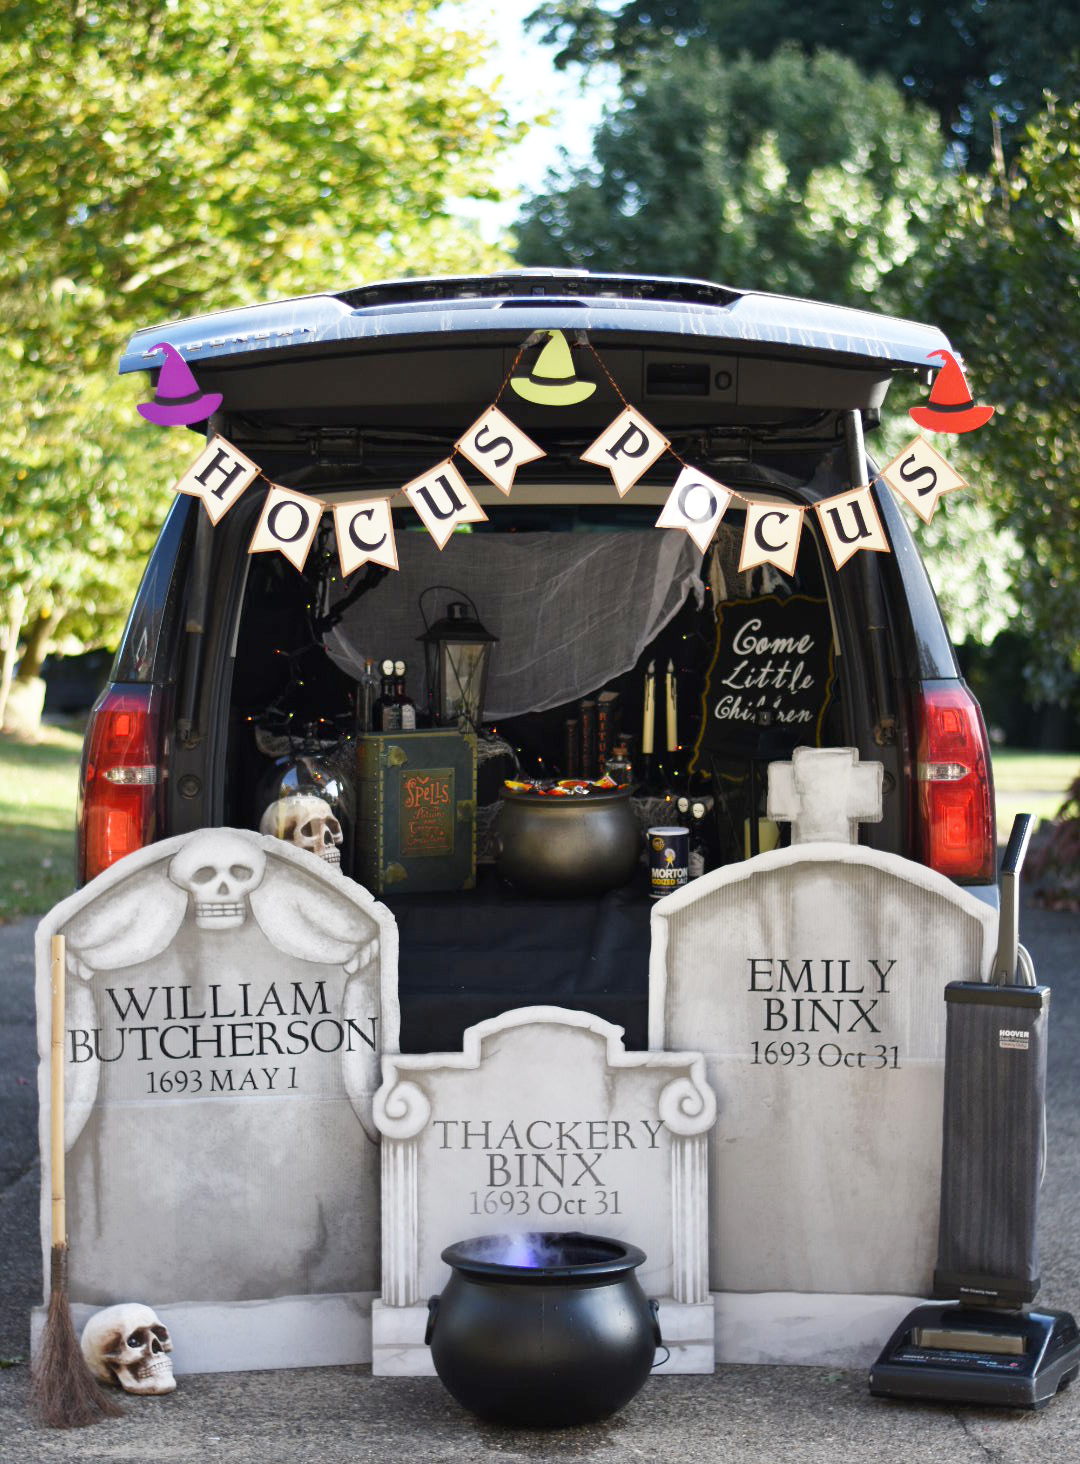 Trunk or Treat 2023 — The Breeze